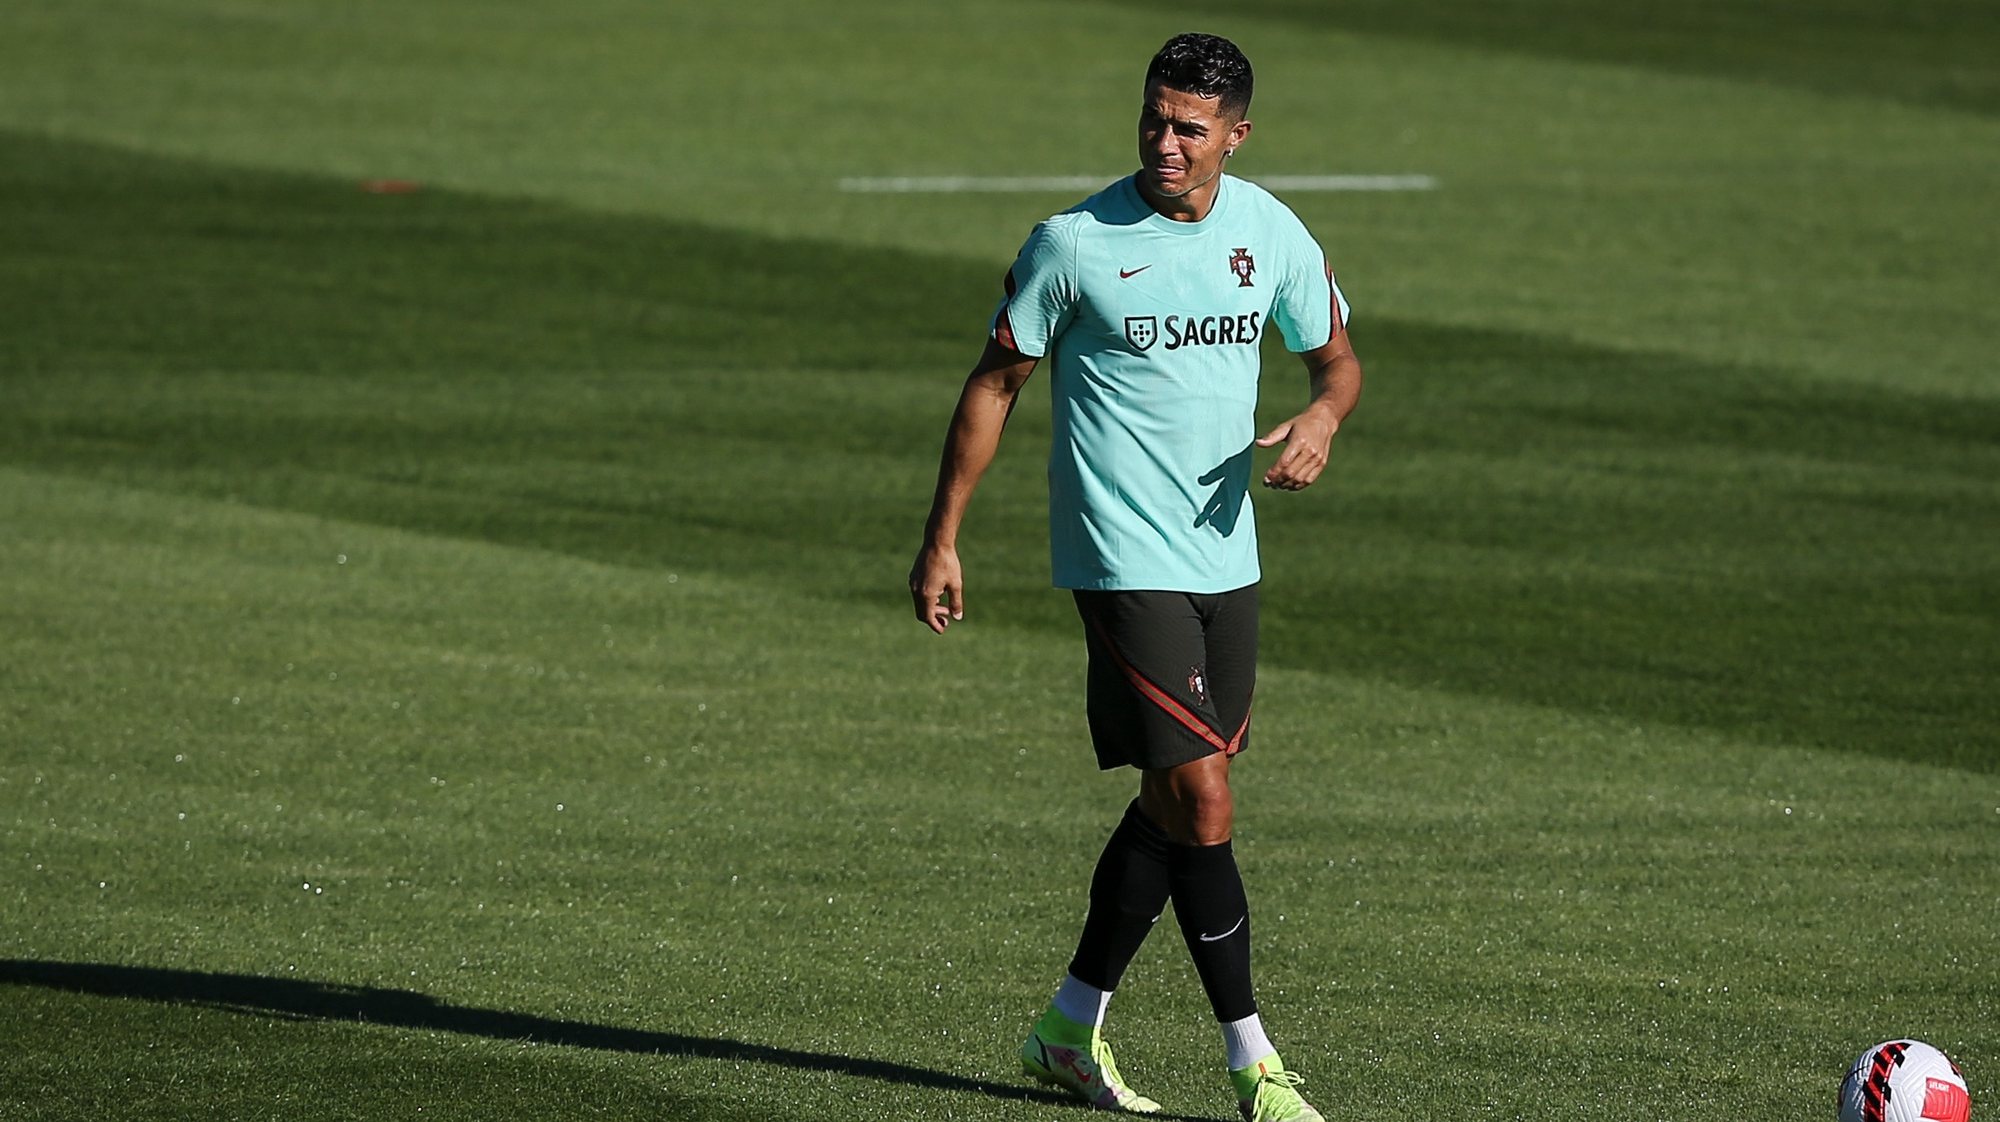 Portugal player Cristiano Ronaldo in action during the Portuguese National Team preparation for the FIFA World Cup Qatar 2022, in Oeiras, outskirts of Lisbon, Portugal, 30 August 2021.  RODRIGO ANTUNES/LUSA